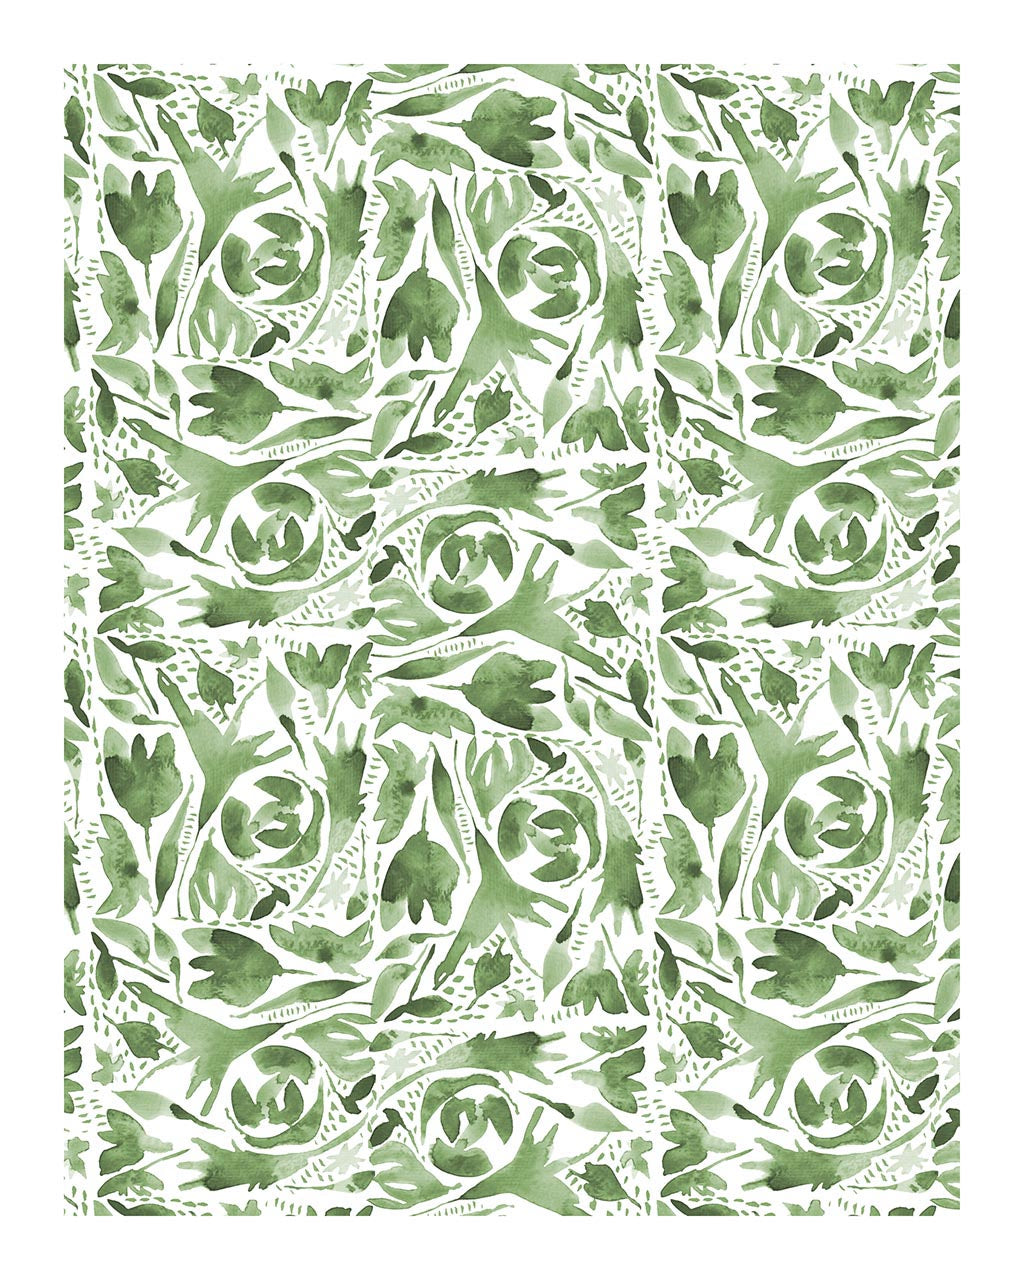 Repeating watercolor floral design in sage greens. Print measures 8x10 inches